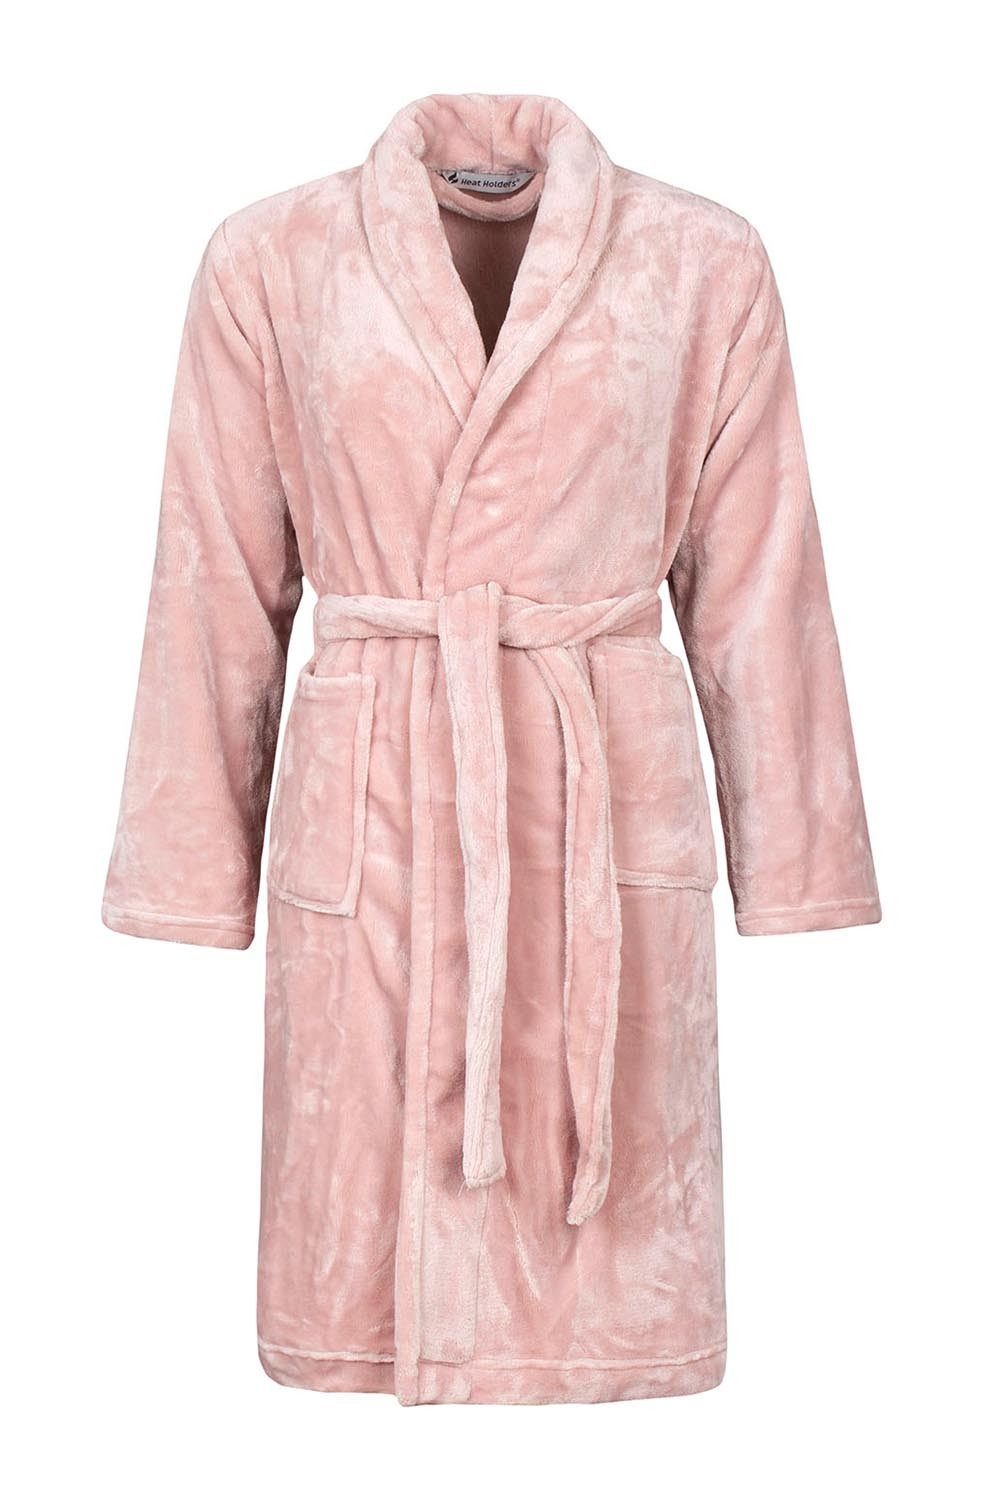 Fluffy Pink Oodie Dressing Gown – The Oodie